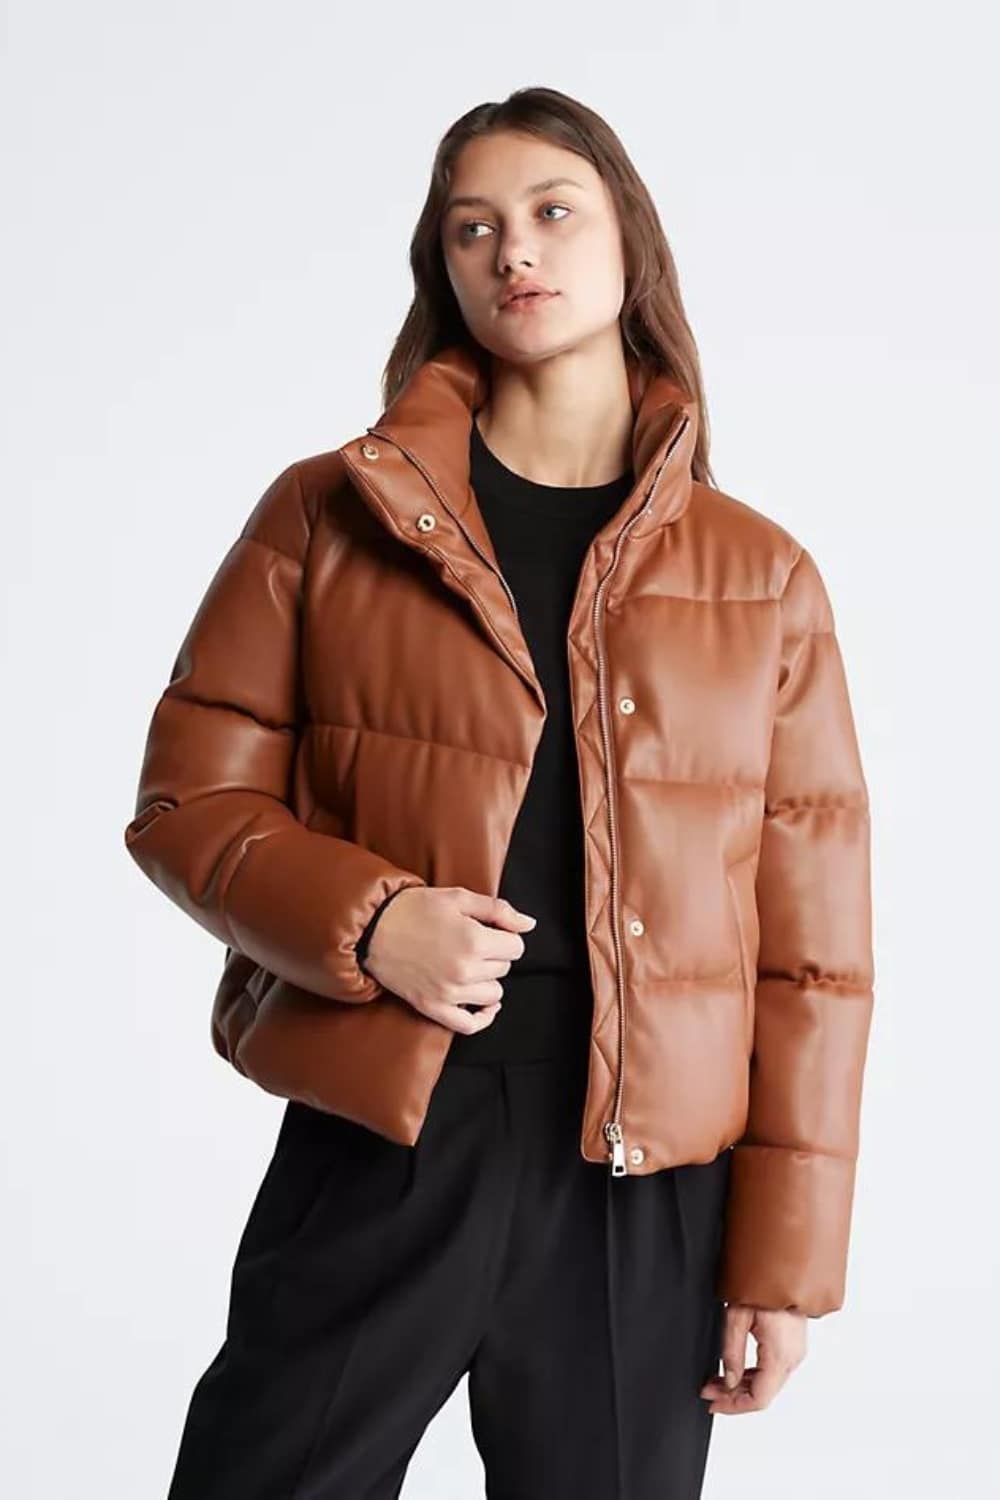 Calvin Klein Faux Leather Puffer Jacket